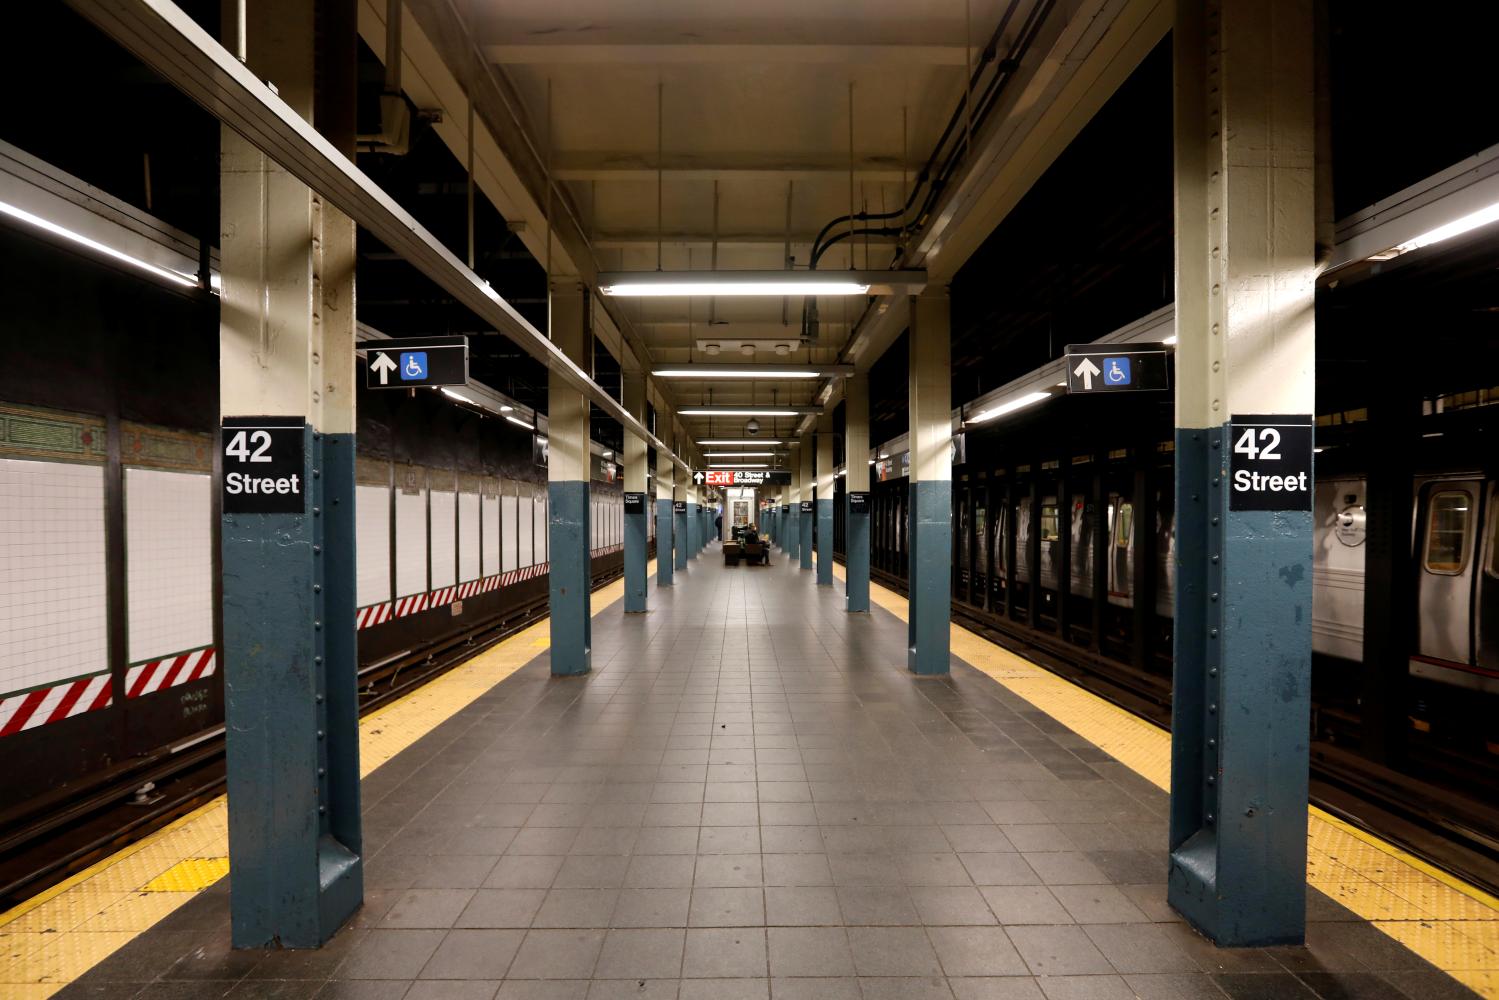 A nearly empty subway platform is seen at the 42nd Street subway station during the coronavirus outbreak in New York City, New York, U.S., March 20, 2020. REUTERS/Mike Segar